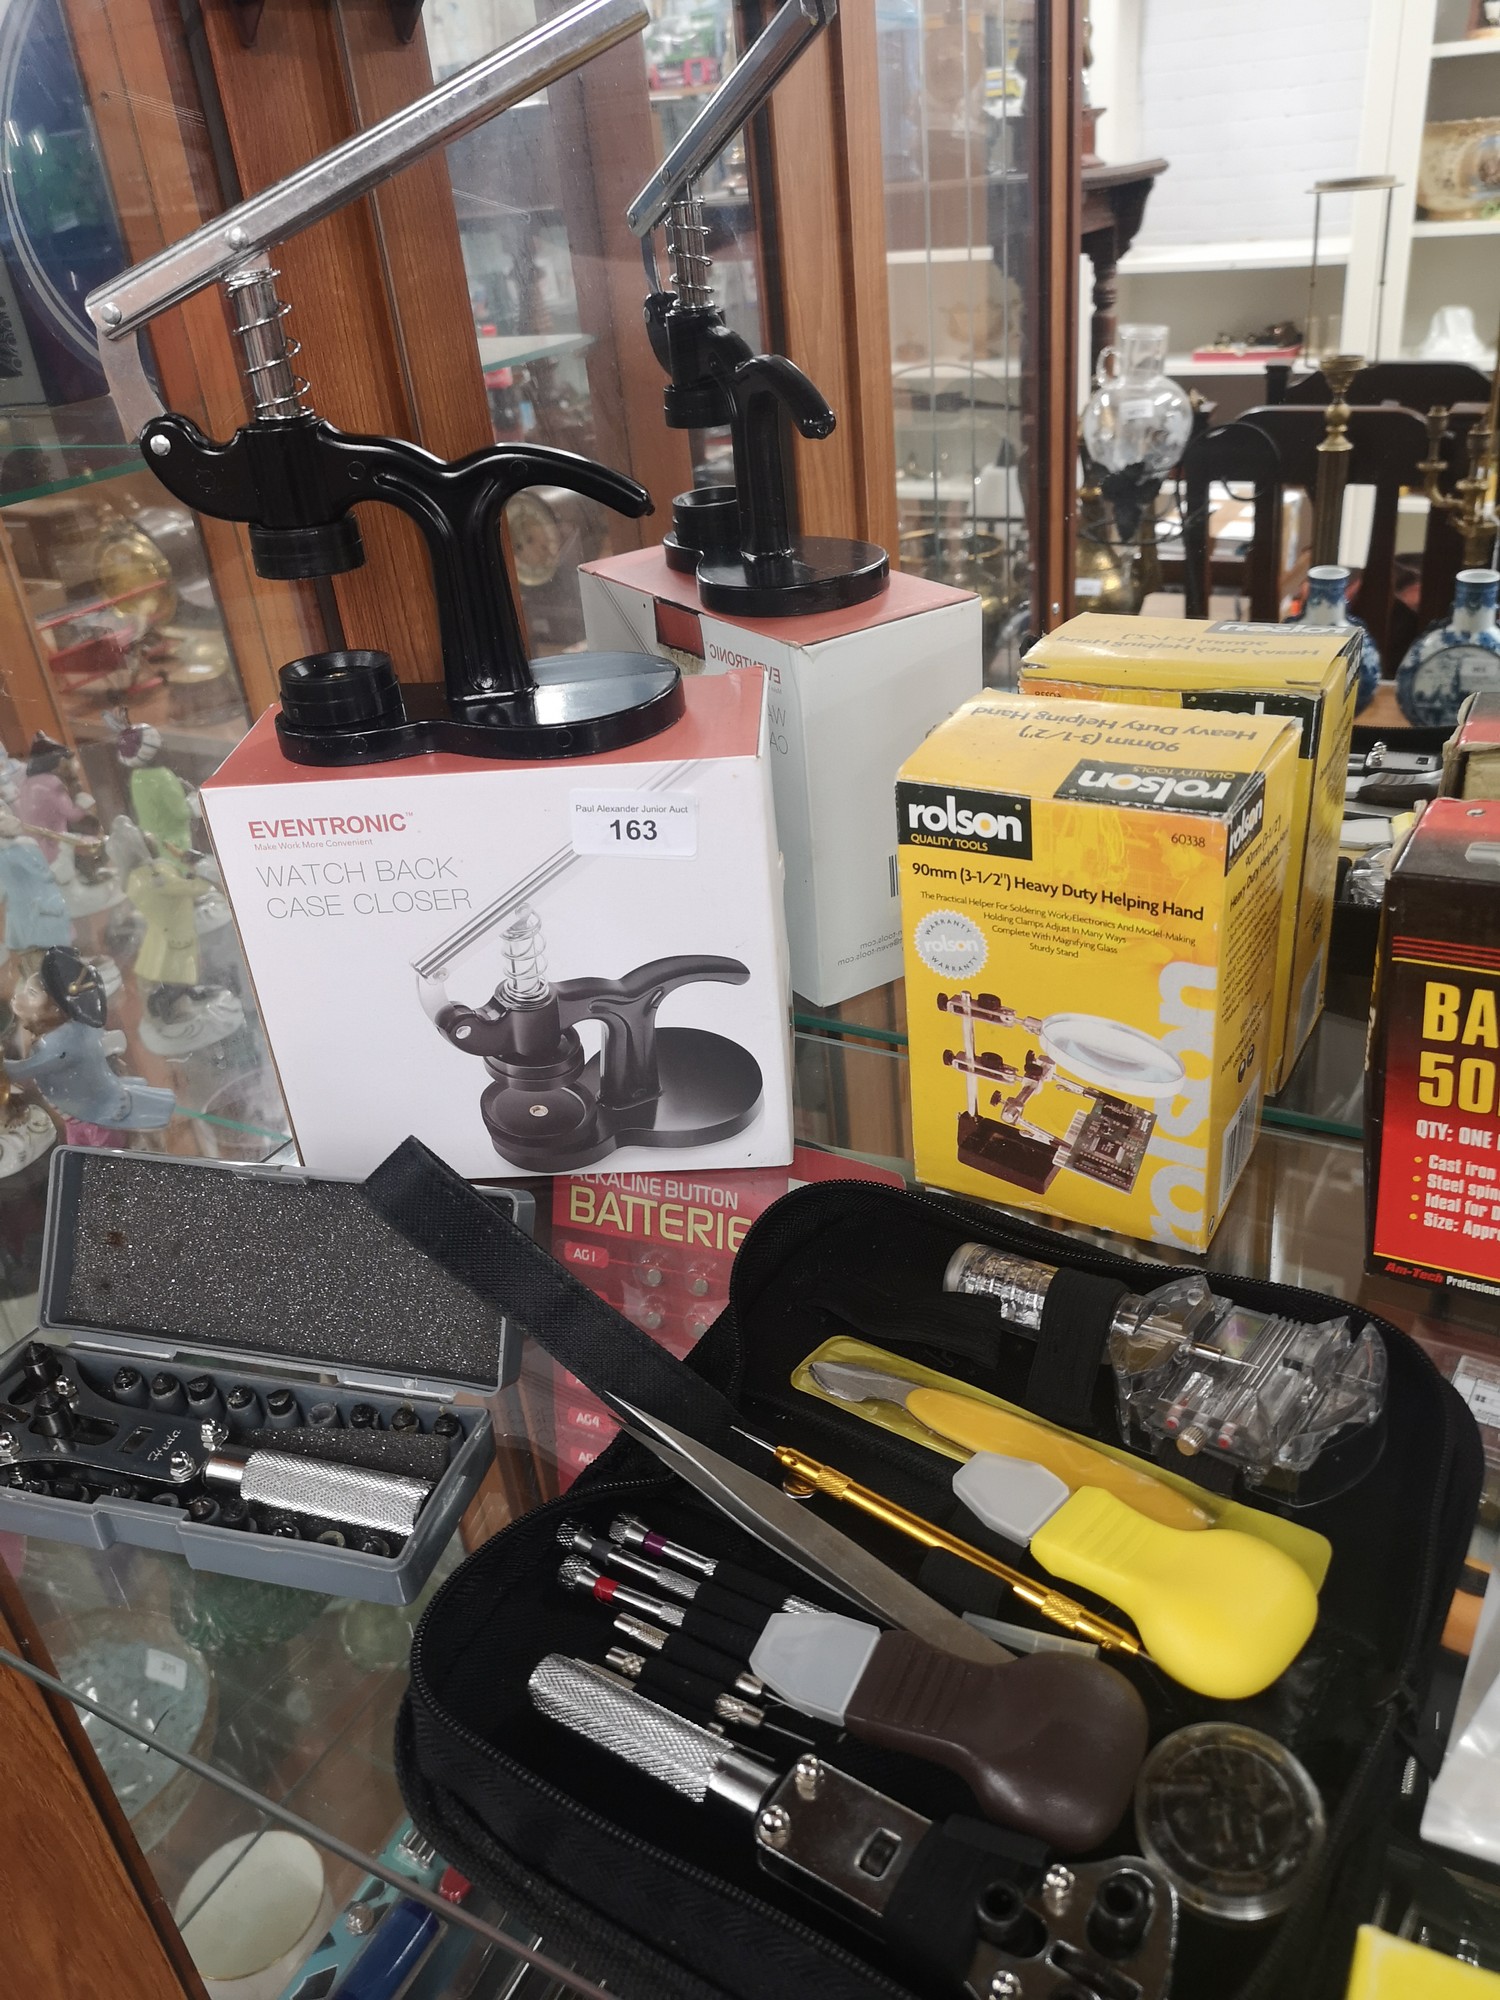 Lot of watch makers tools and accessories. - Image 2 of 3